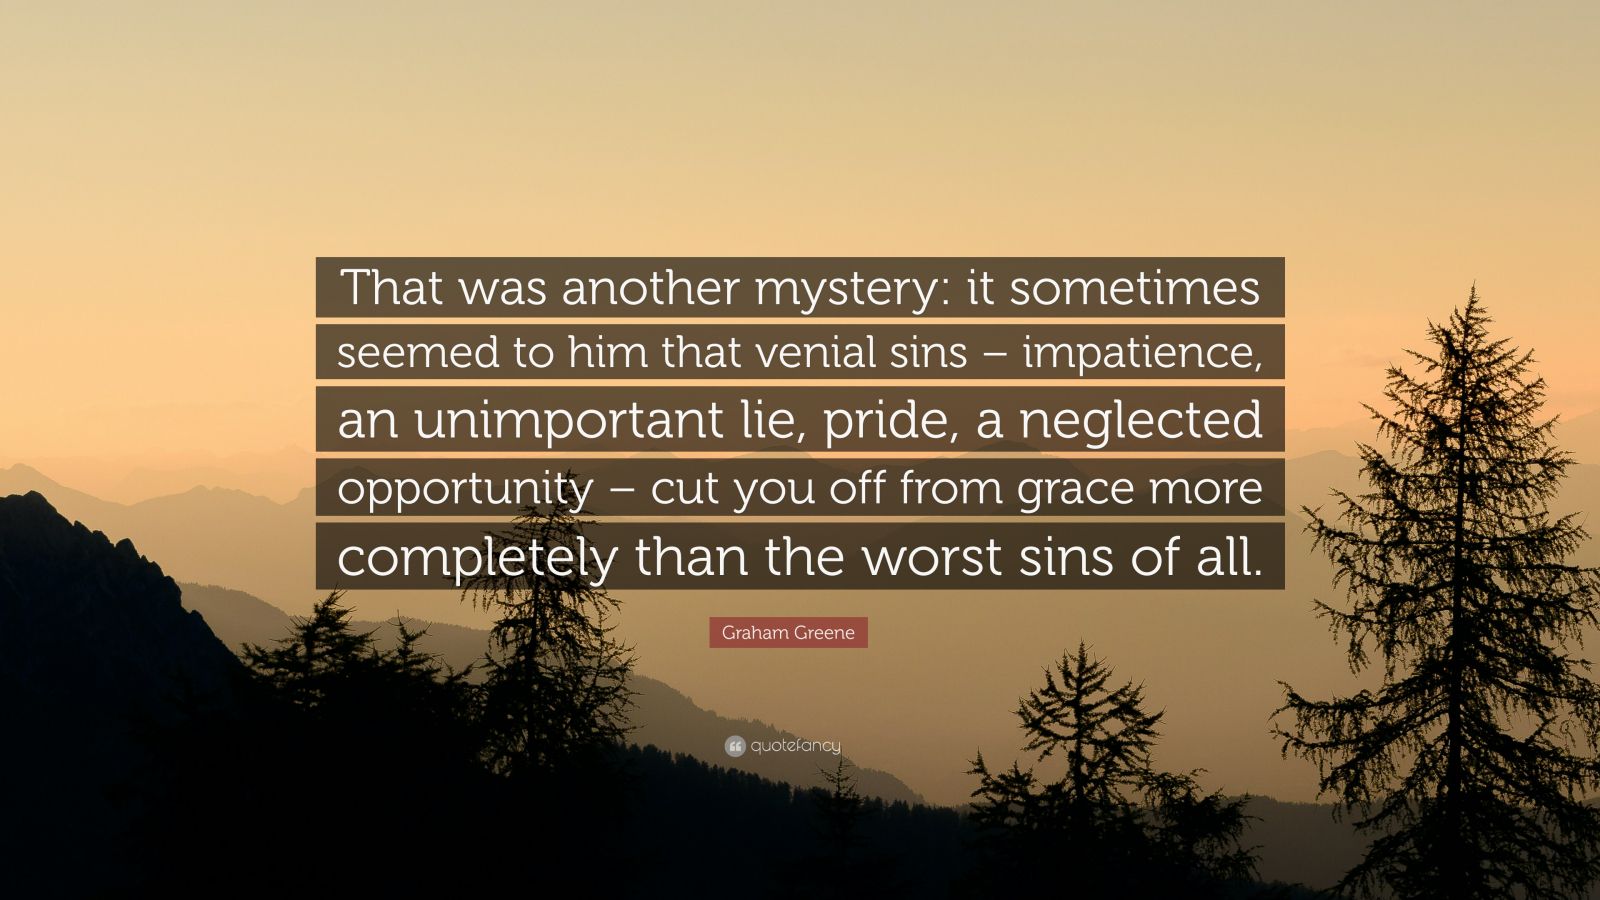 Graham Greene Quote: “That was another mystery: it sometimes seemed to ...